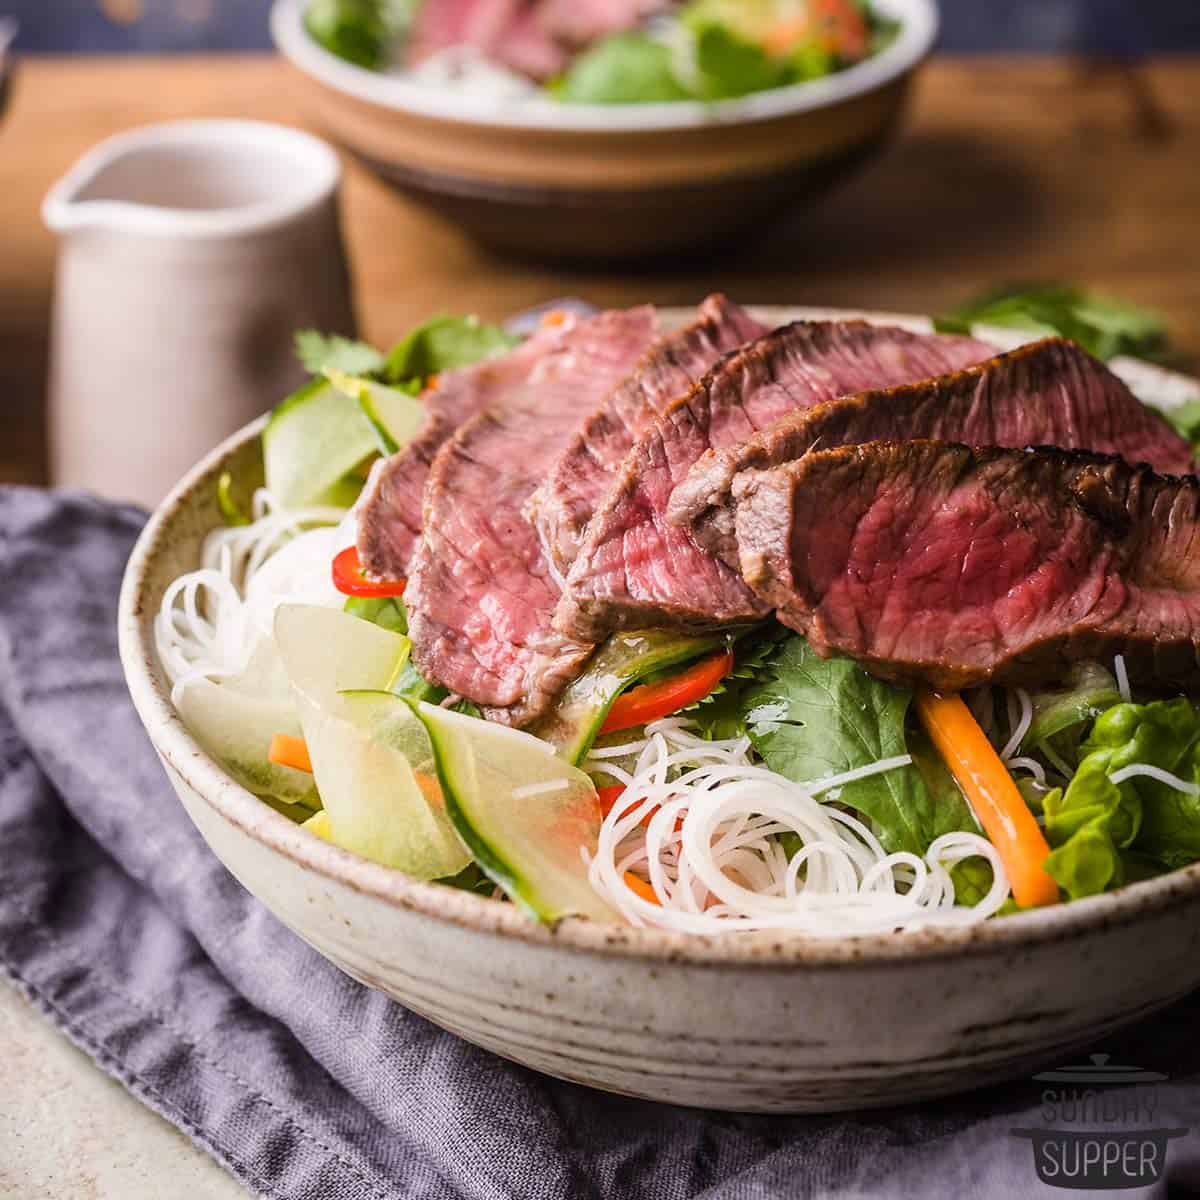 Slices of sirloin steak over rice noodles and vegetables